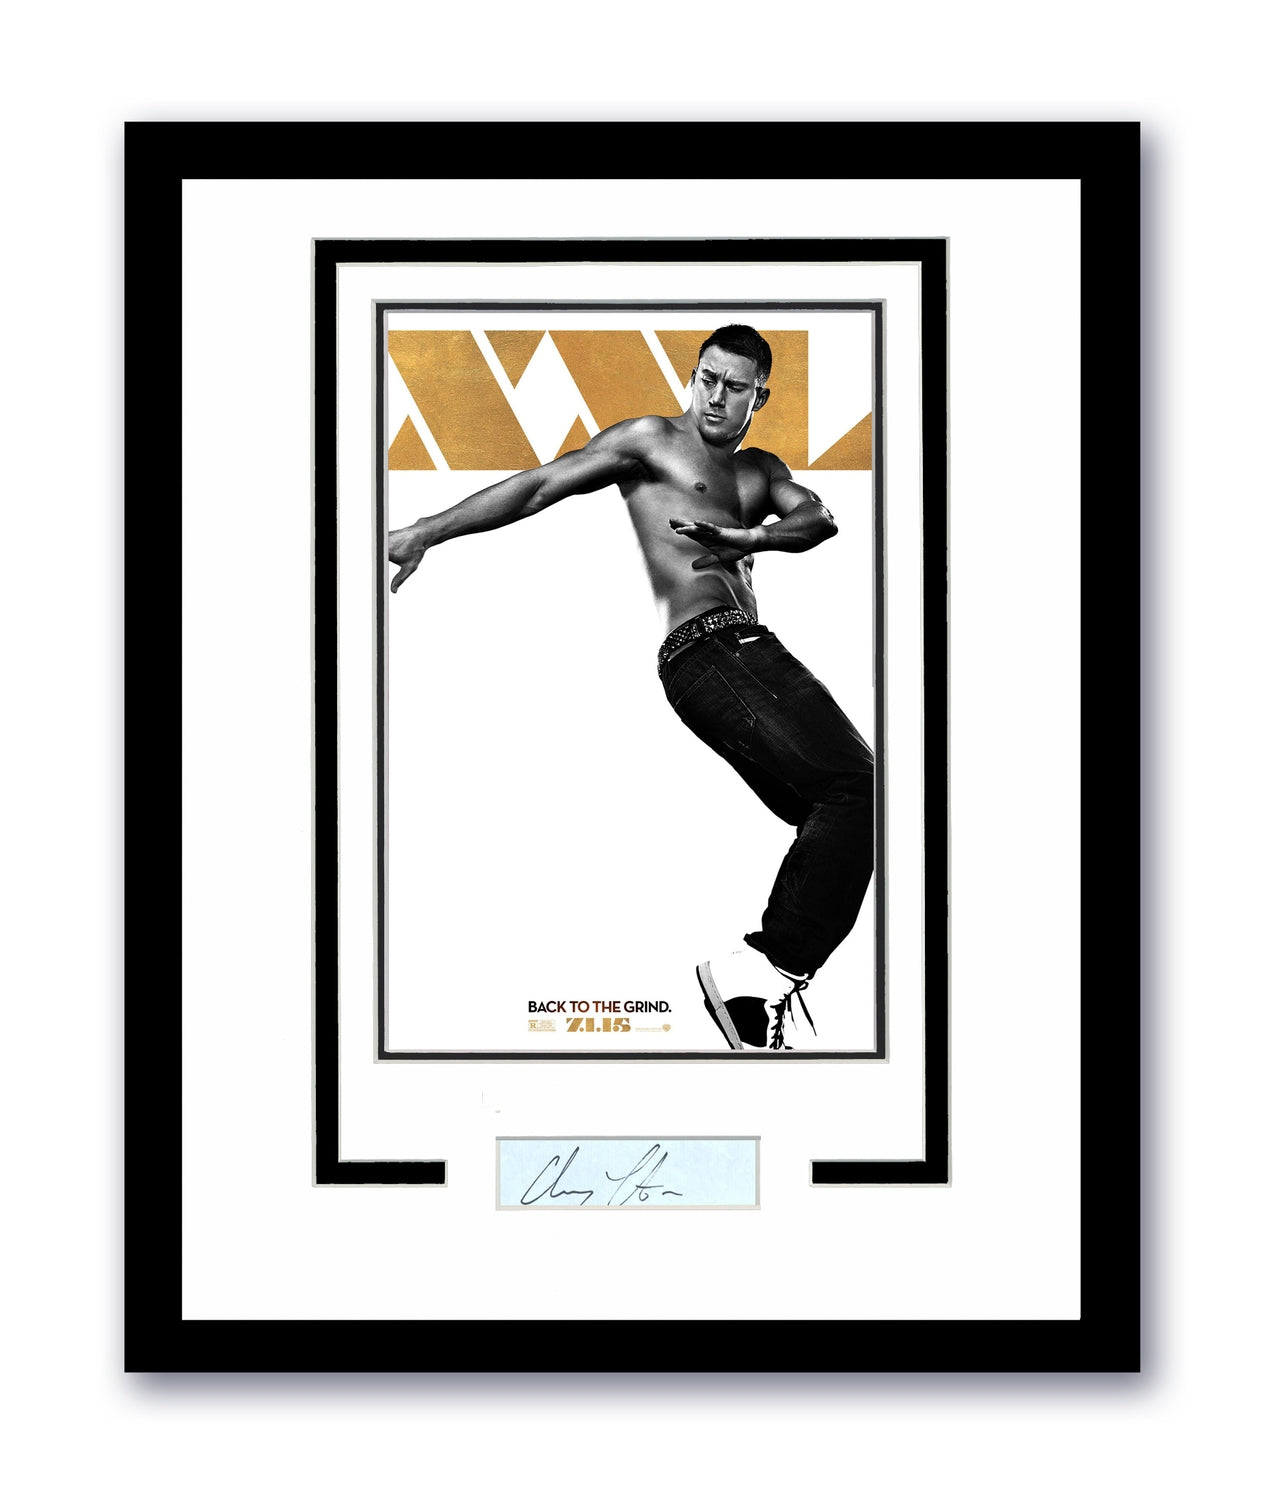 Magic Mike Channing Tatum Autographed Signed 11x14 Framed Poster Photo ACOA 3